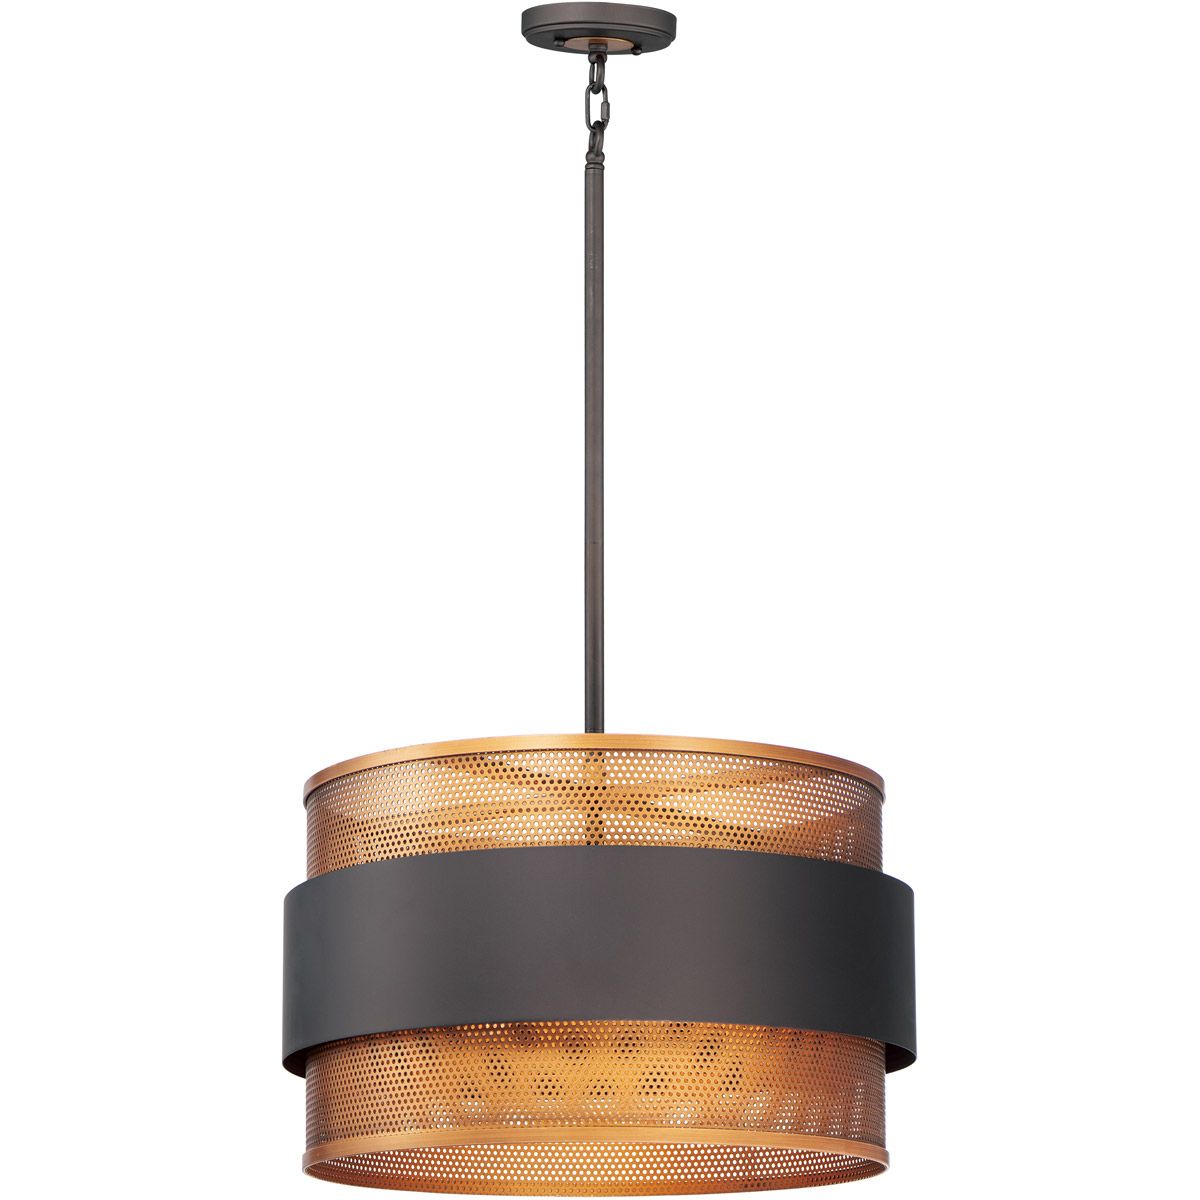 Maxim Lighting 31204oiab Caspian Pendant Oil Rubbed Bronze Within Oil Rubbed Bronze And Antique Brass Four Light Chandeliers (Photo 4 of 15)